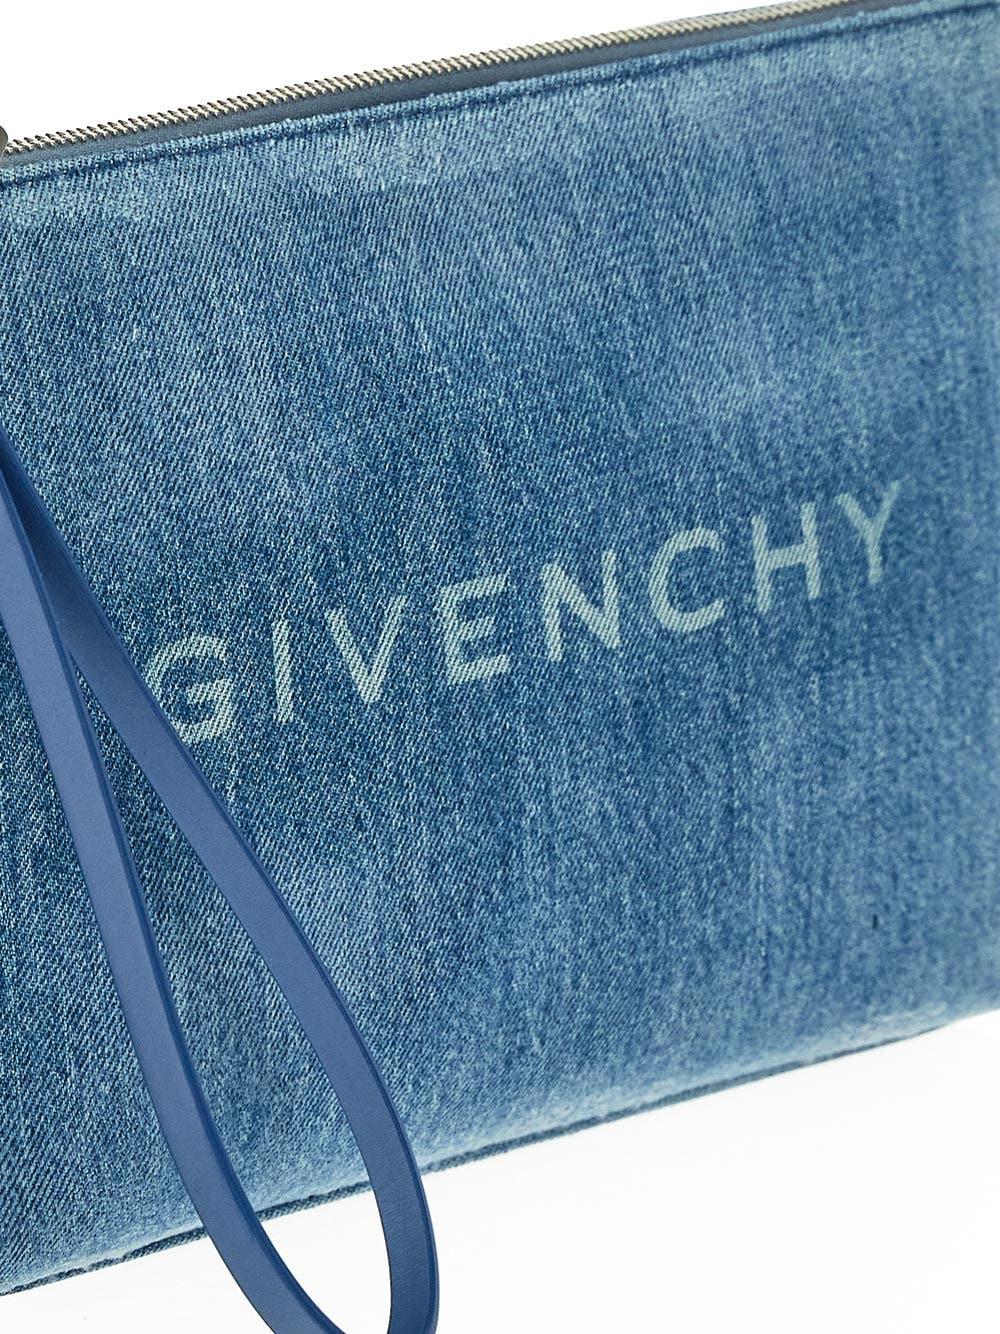 Givenchy Travel Pouch In Denim in Blue | Lyst